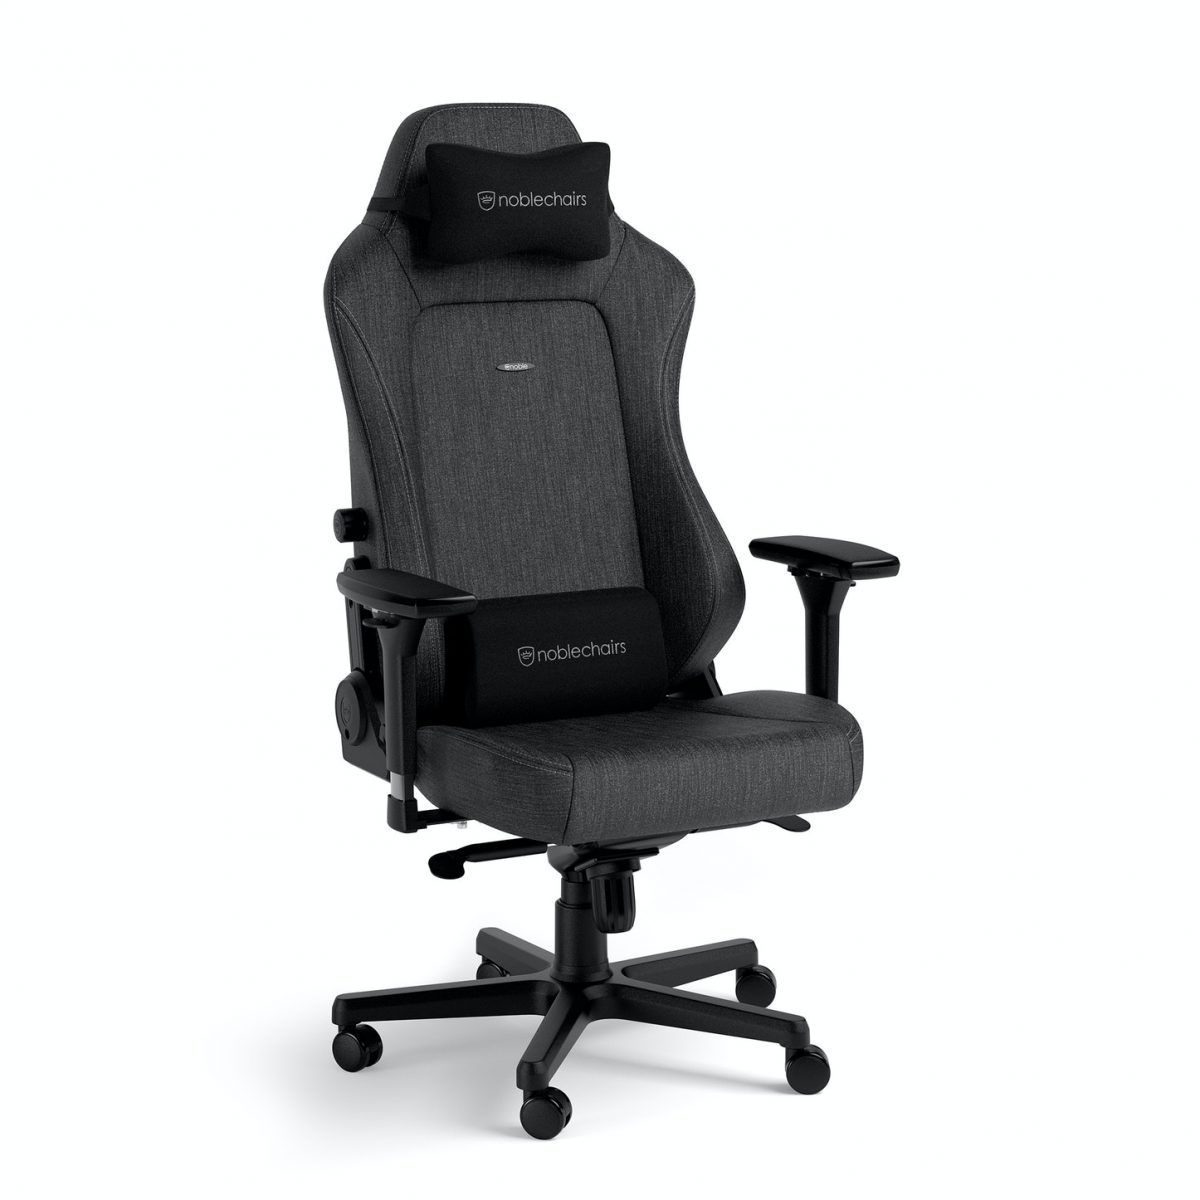 noblechairs HERO Gaming Chair - Fabric Breathable, steel armrests,  60mm casters, 150kg - Anthracite - CASEKING 2.35.63.01.013